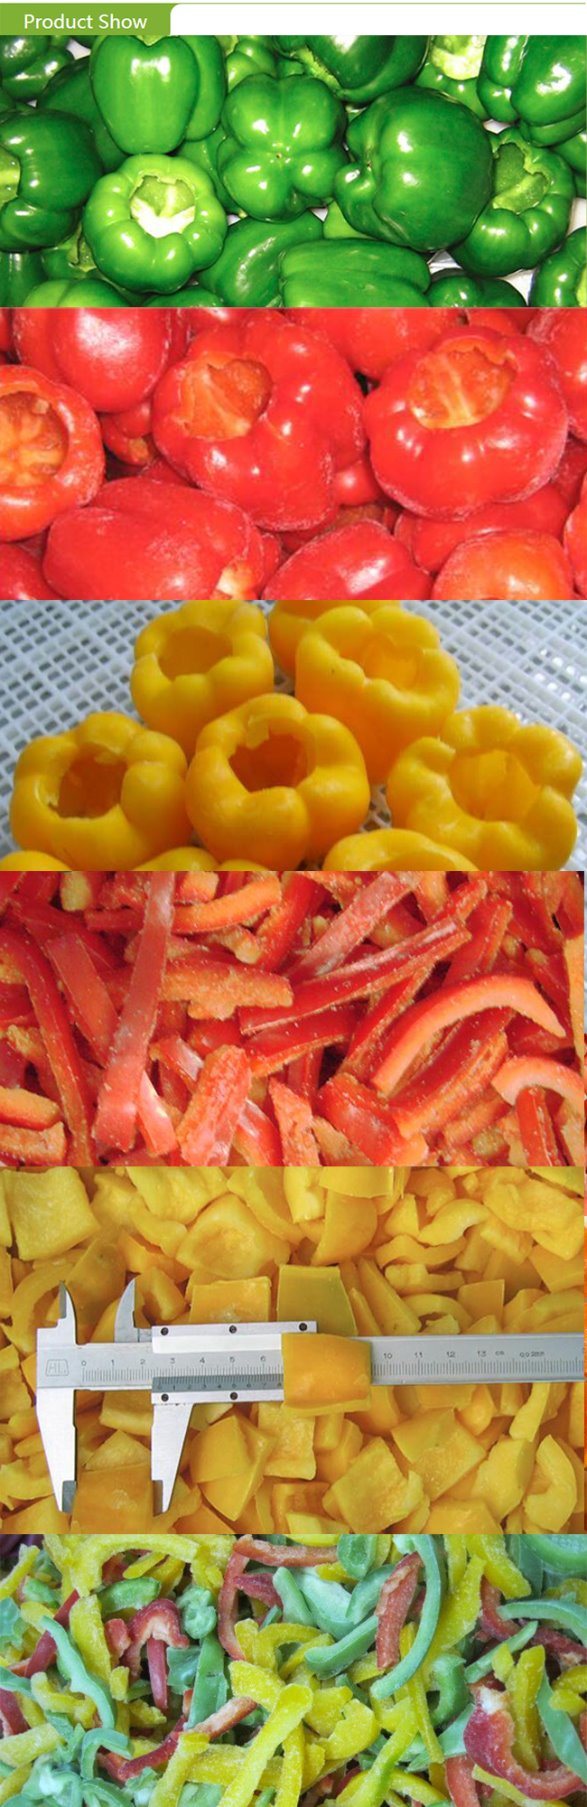 Frozen Mixed Sweet Pepper Dices (green/red/yellow)